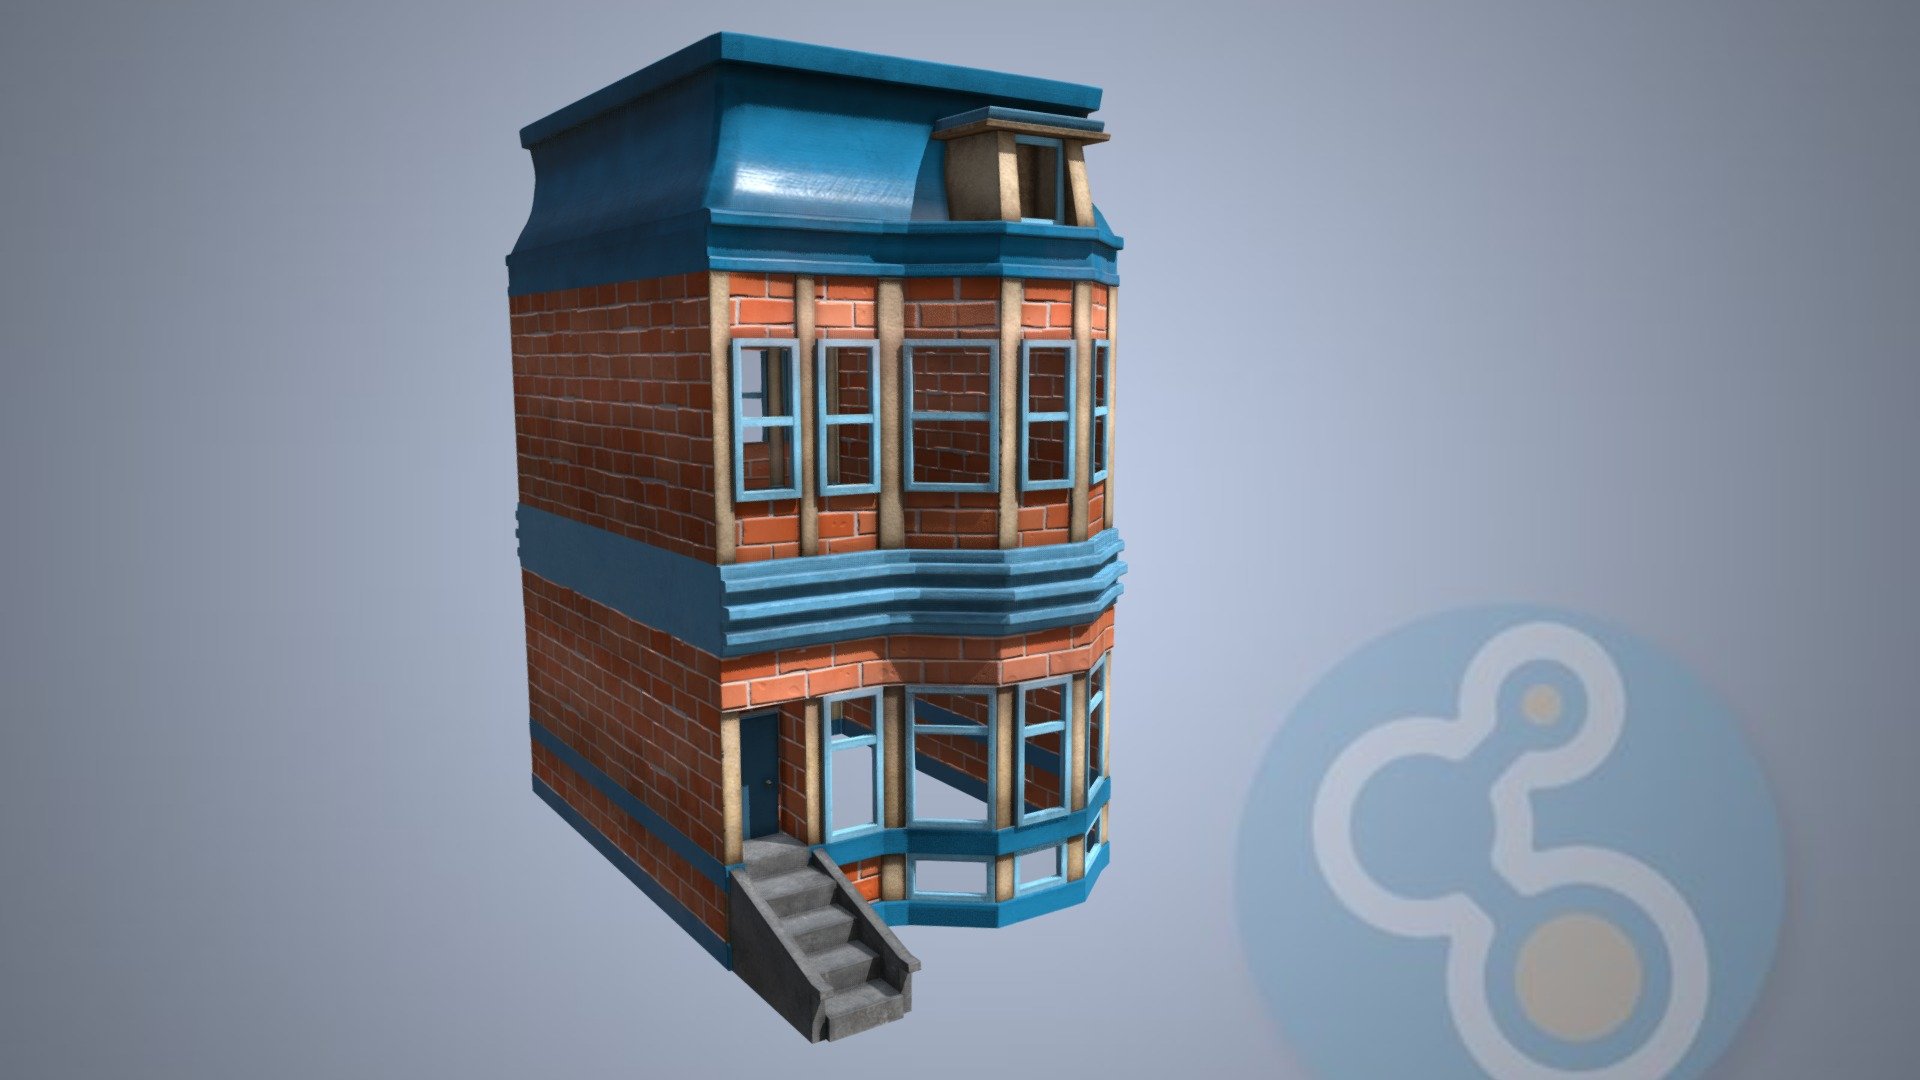 A stylized building exterior.

Mid poly, ideal for game engines/VFX.

Includes a .blend, .fbx, and texture sets in PBR format 3d model